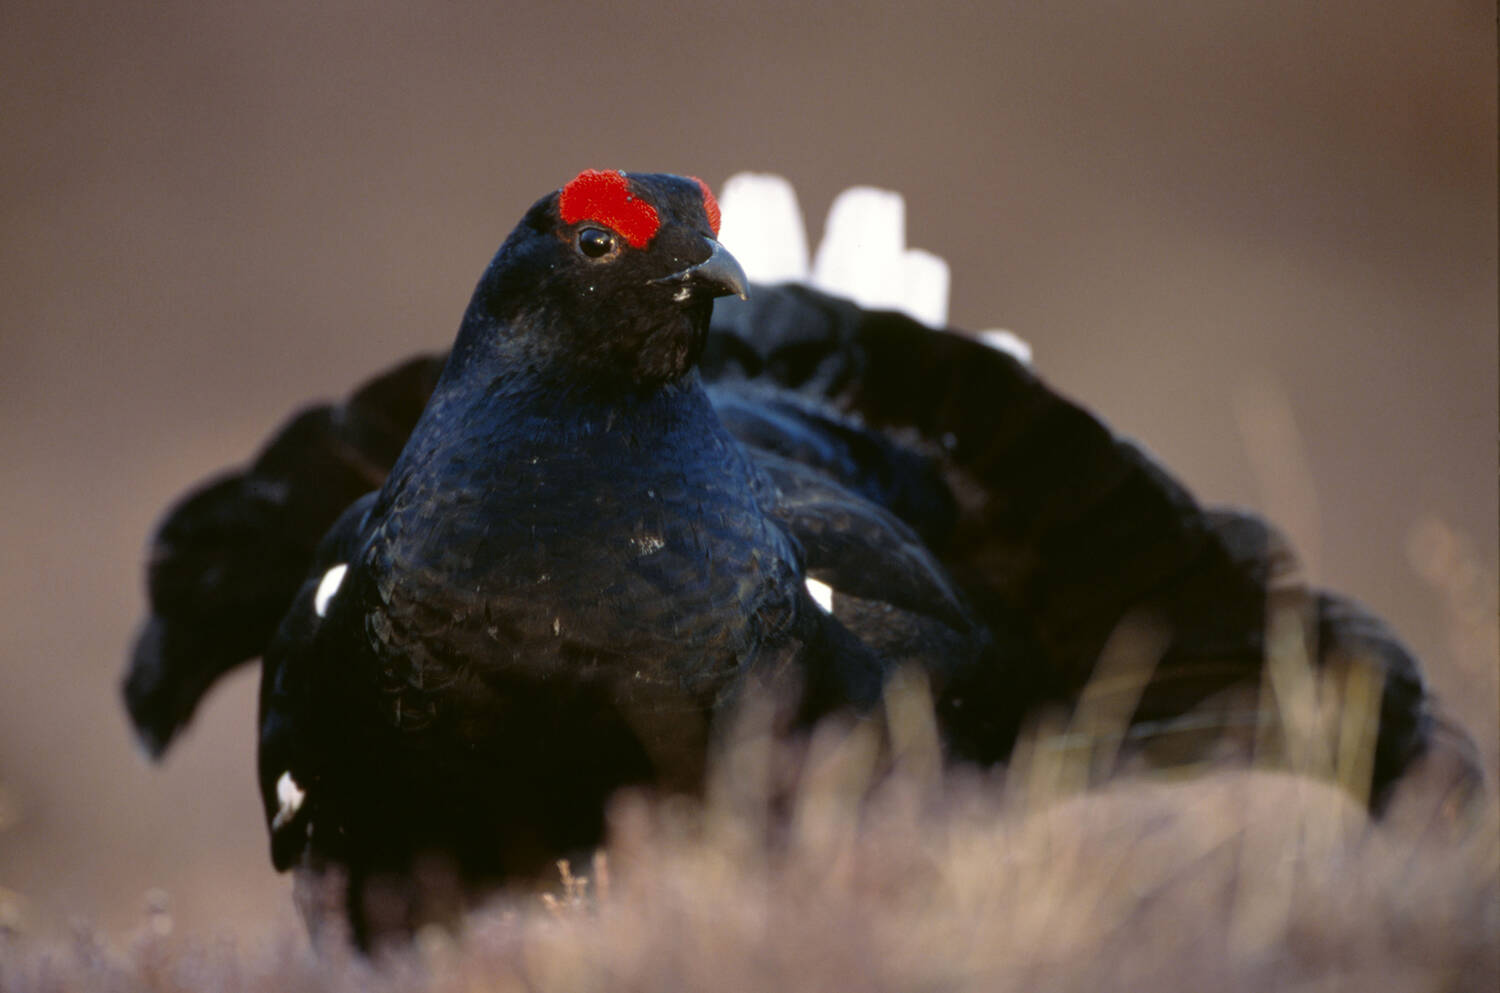 A close-up of a black grouse, sitting on a patch of wispy grass. Its red eyebrow is very clear, and it holds its tail fanned out behind it, revealing the white tail feathers.